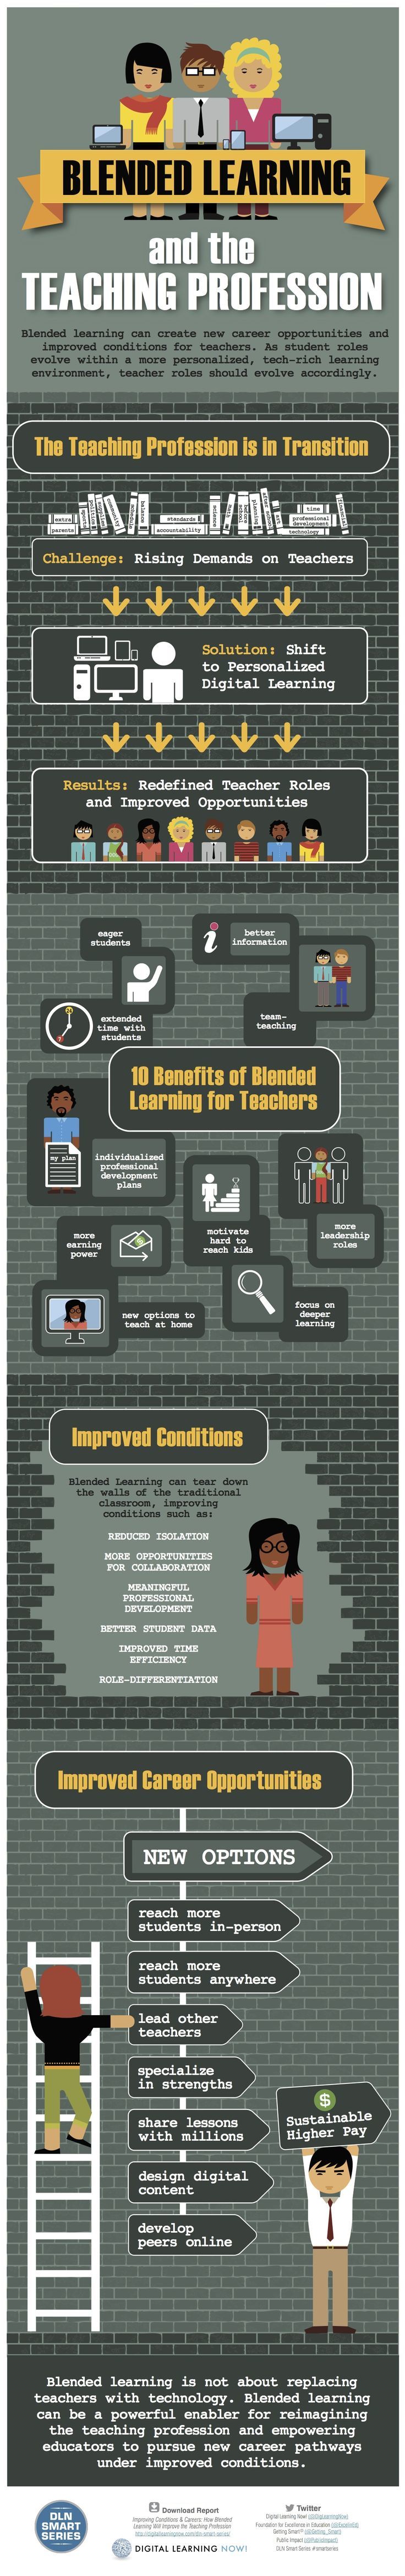 Blended Learning and Teaching Profession Infographic